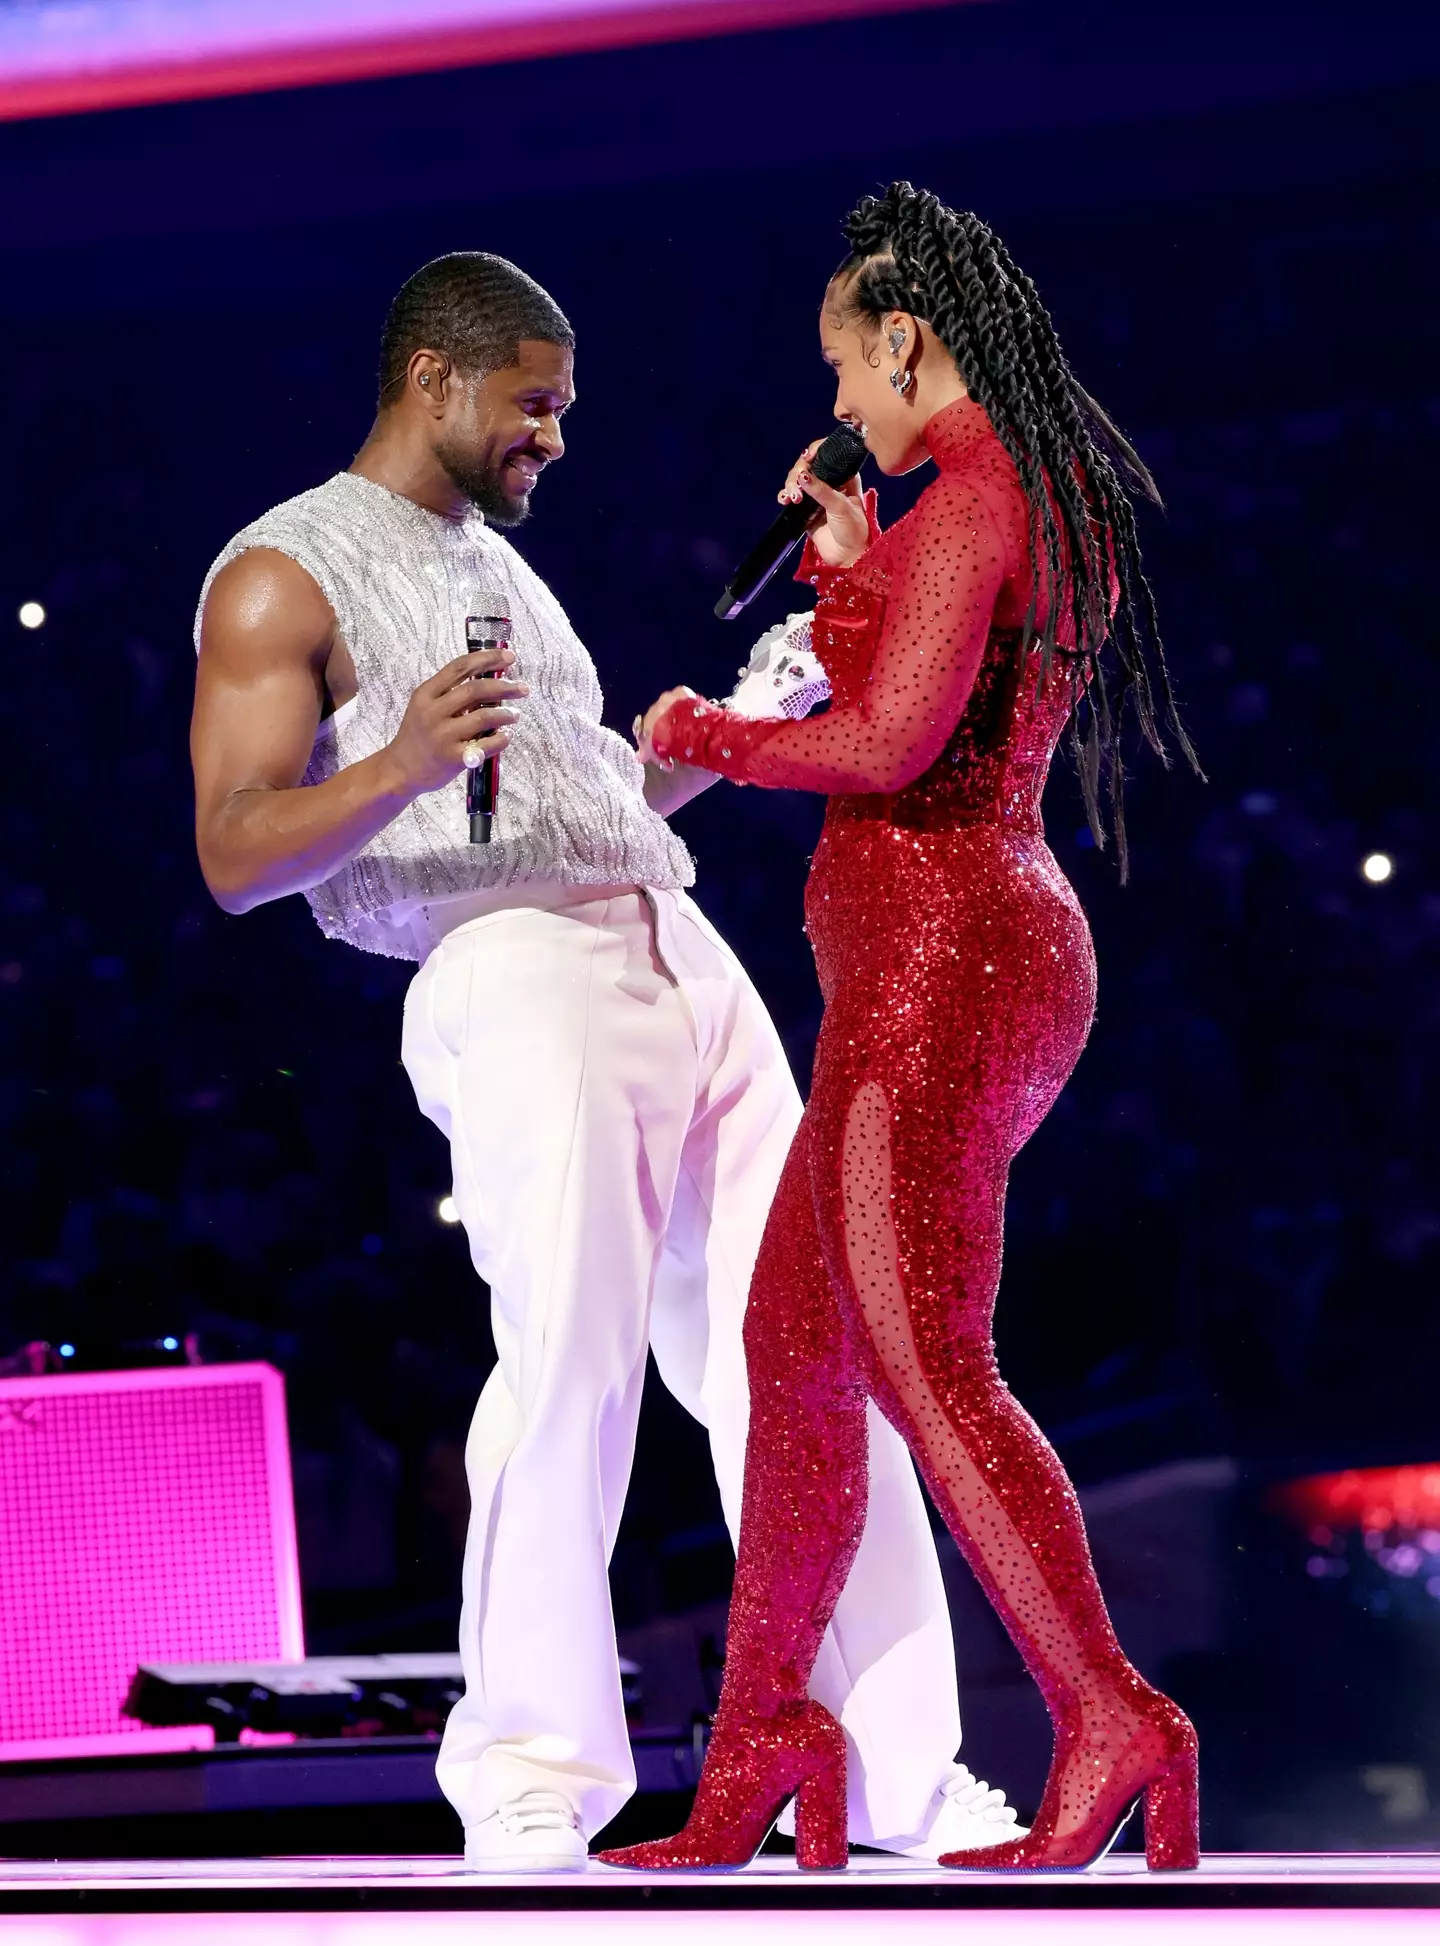 Usher and Alicia Keys perform at the Super Bowl.